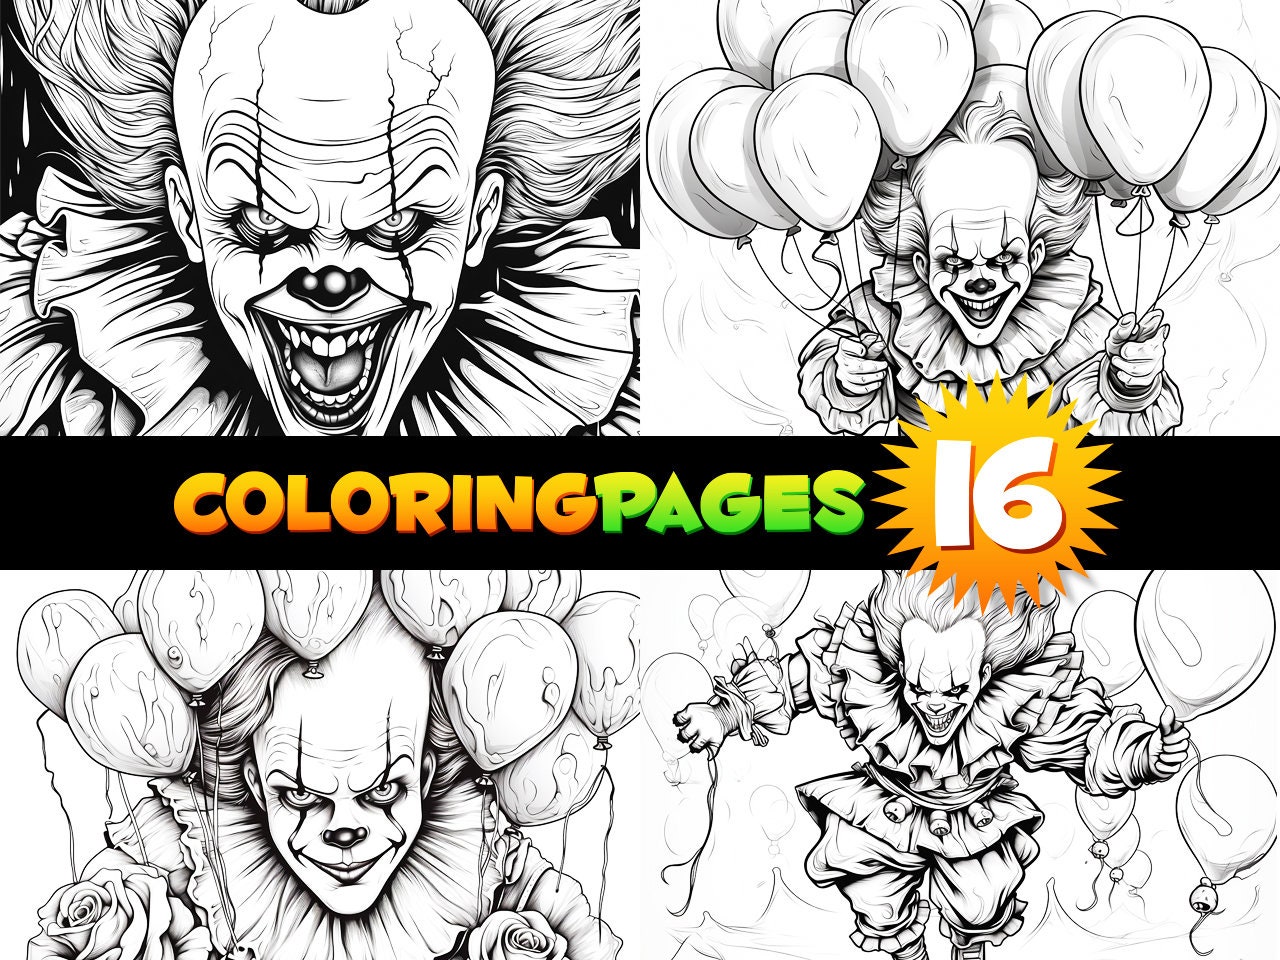 Instant halloween fun coloring pages pennywise clown it download print at home unlimited copies horror movie book surprise